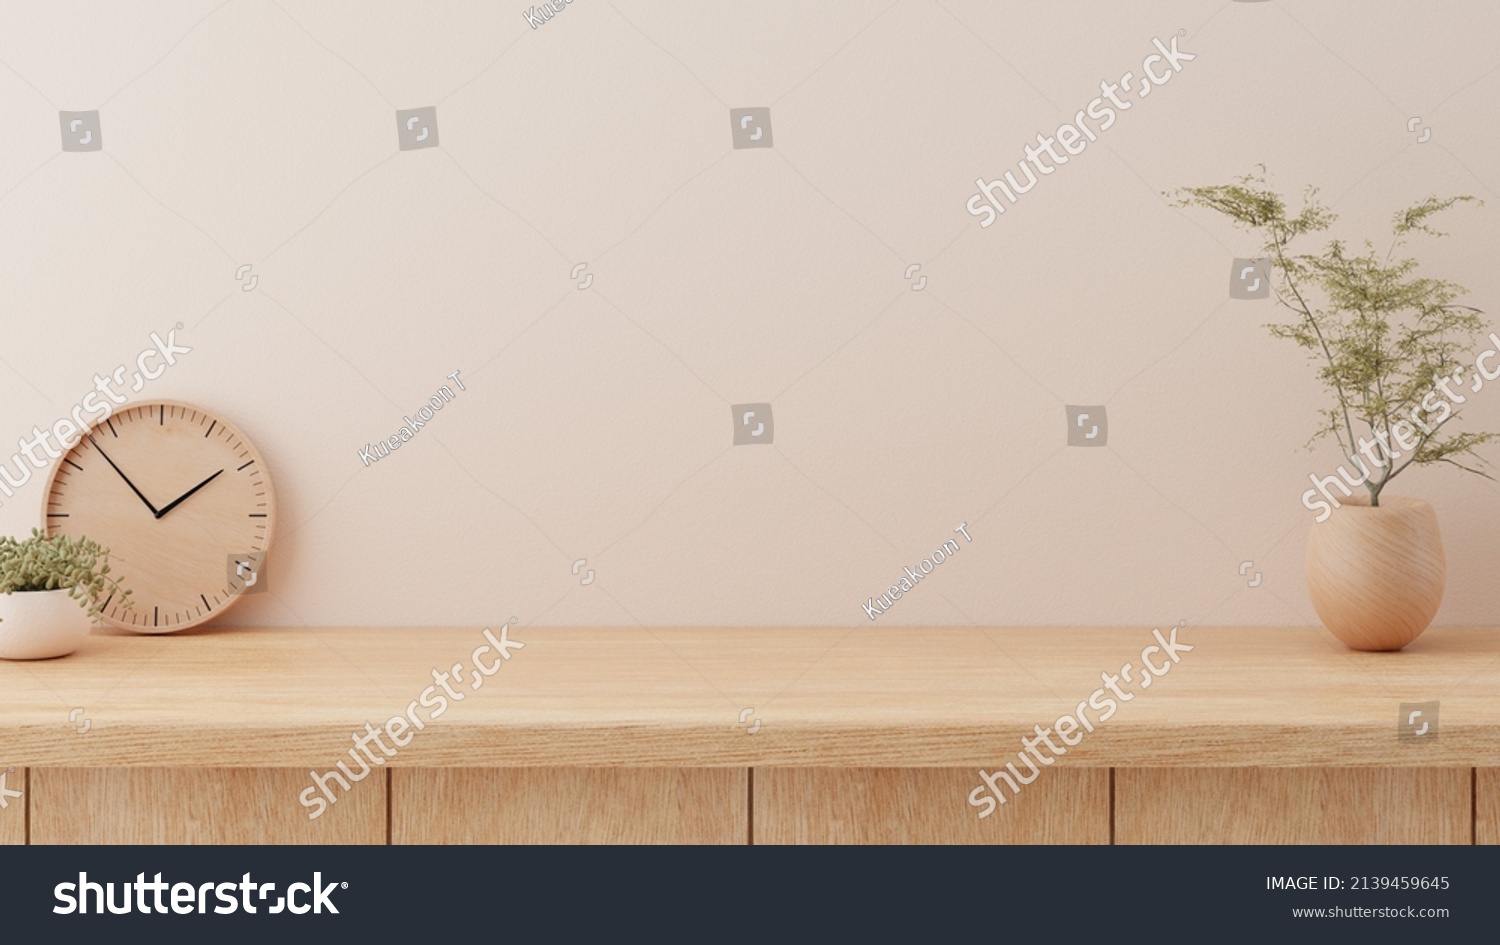 Minimal cozy counter mockup design for product presentation background or branding in Japan style with bright wood counter and warm white wall include vase plant and clock. Kitchen interior  #2139459645